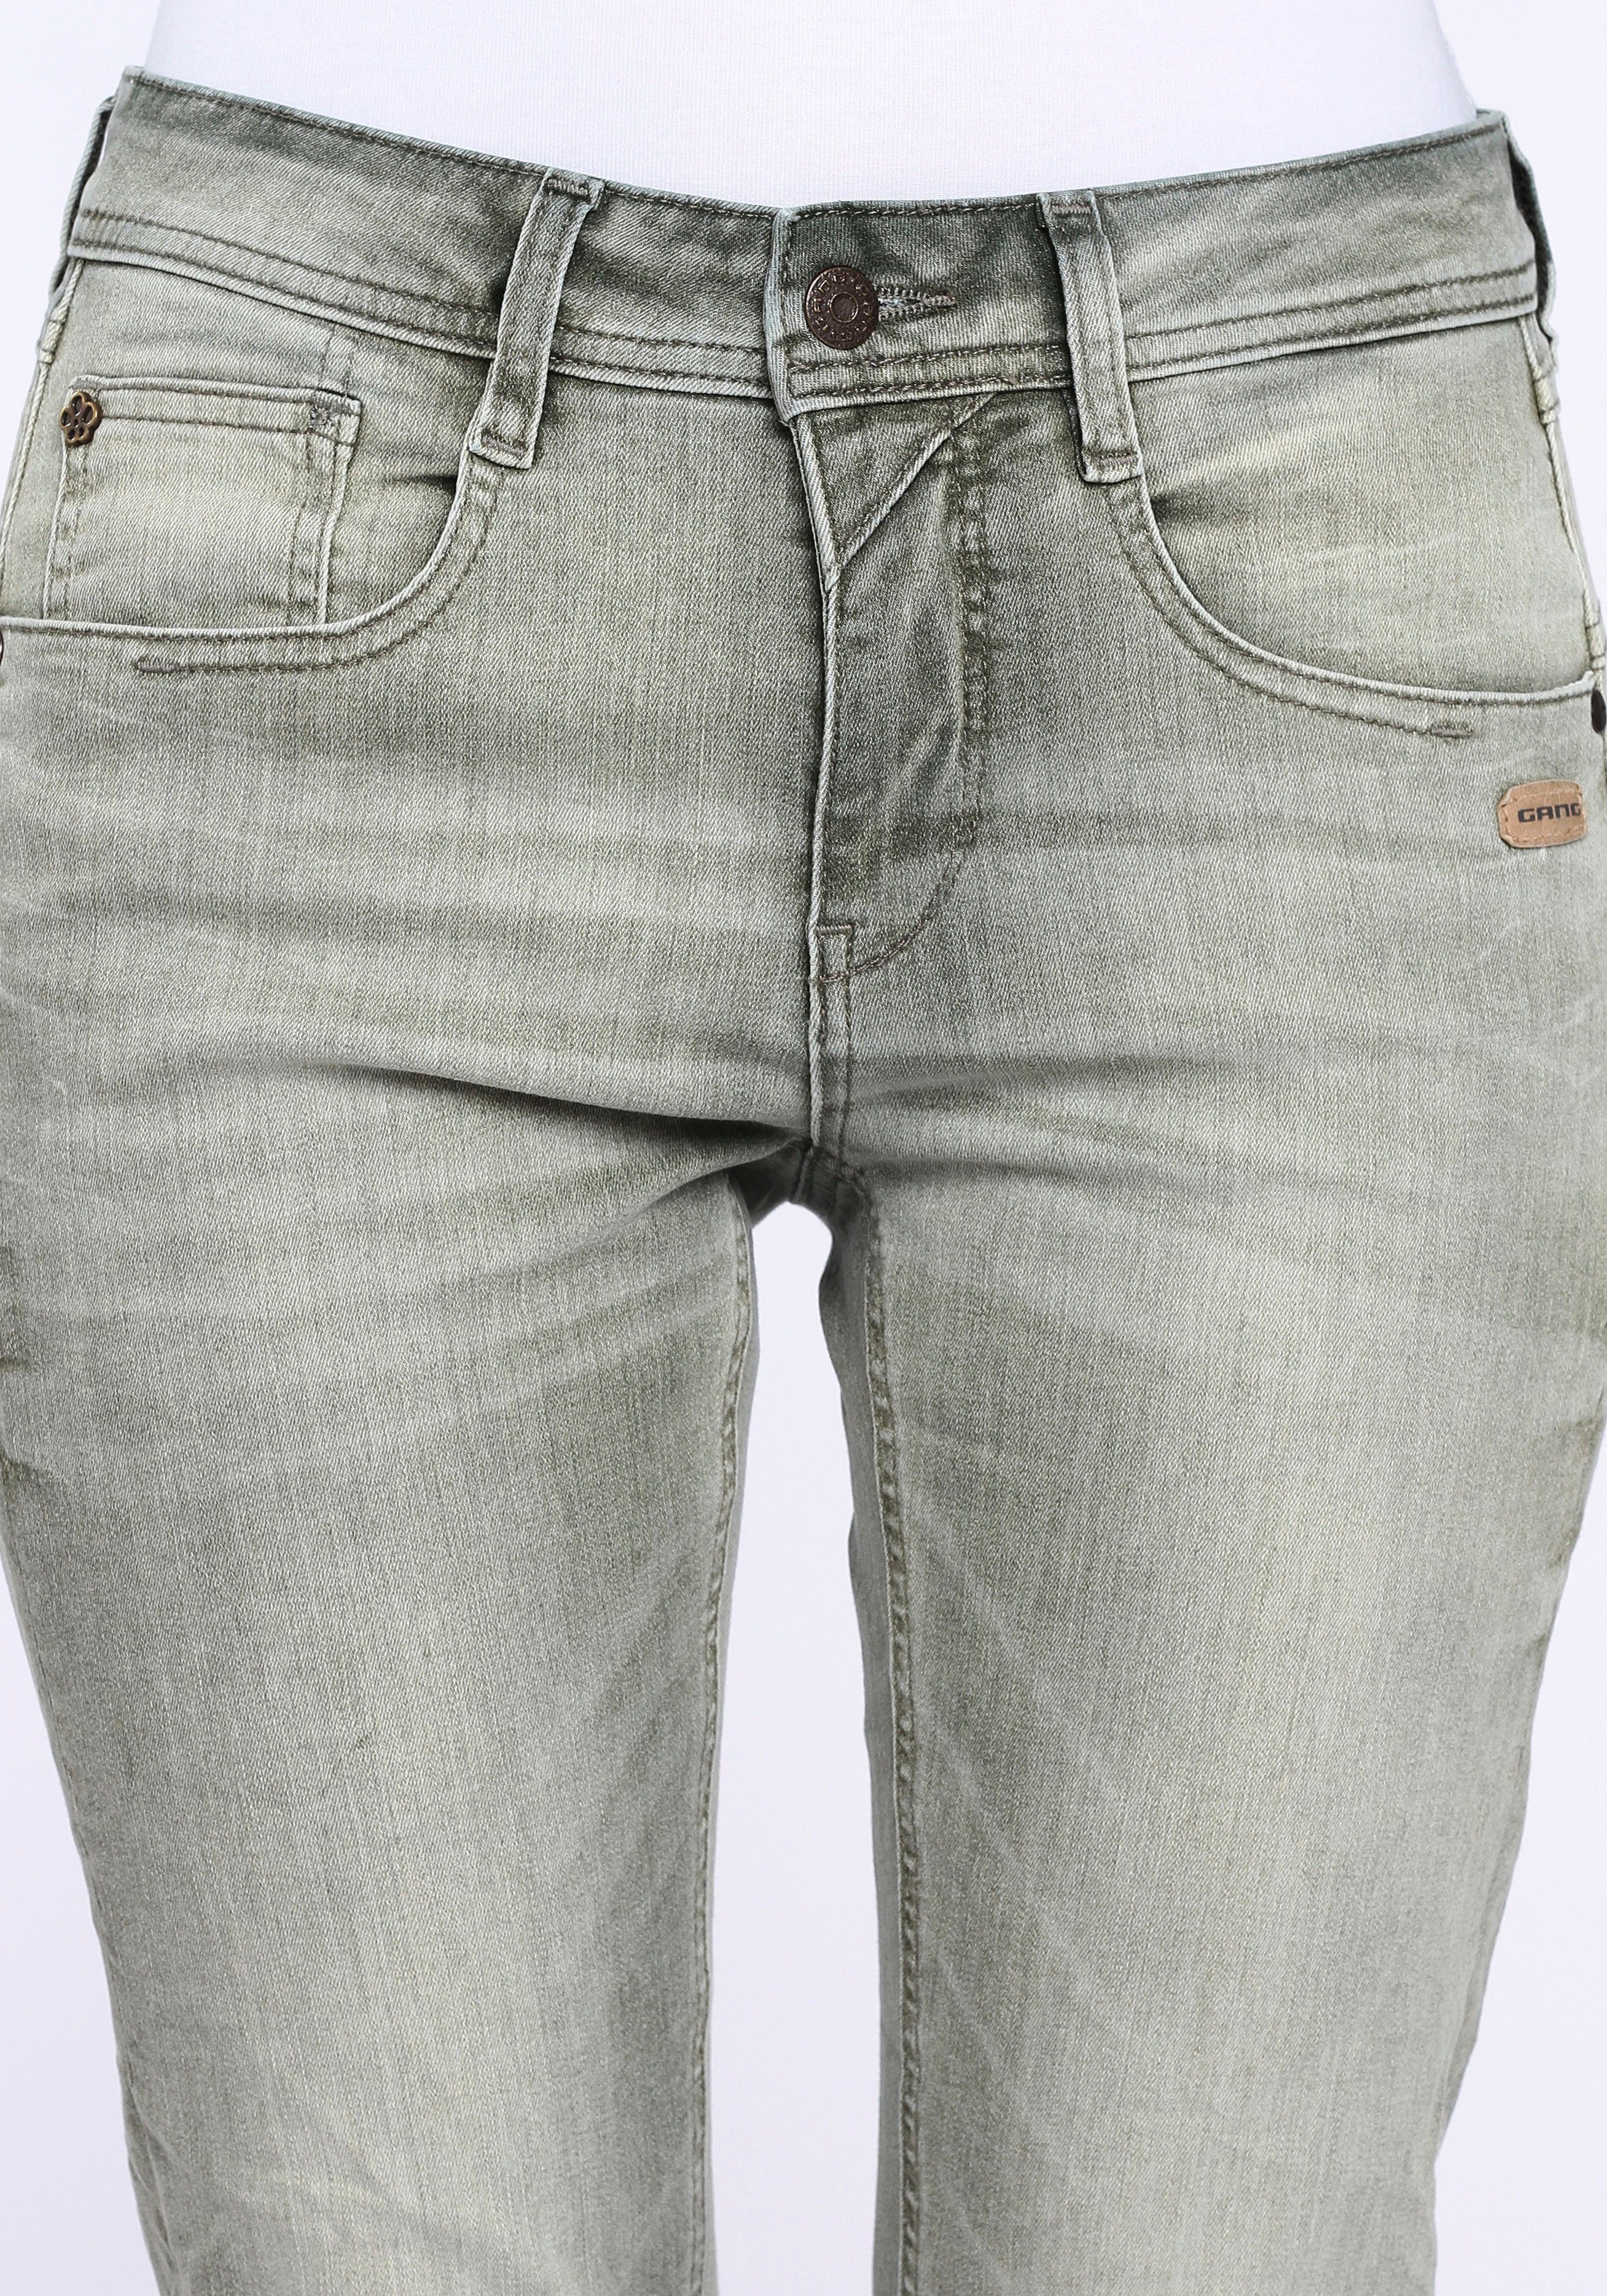 Relax-fit-Jeans Elasthan-Anteil washed durch down (grey used) GANG Sitz perfekter 94AMELIE